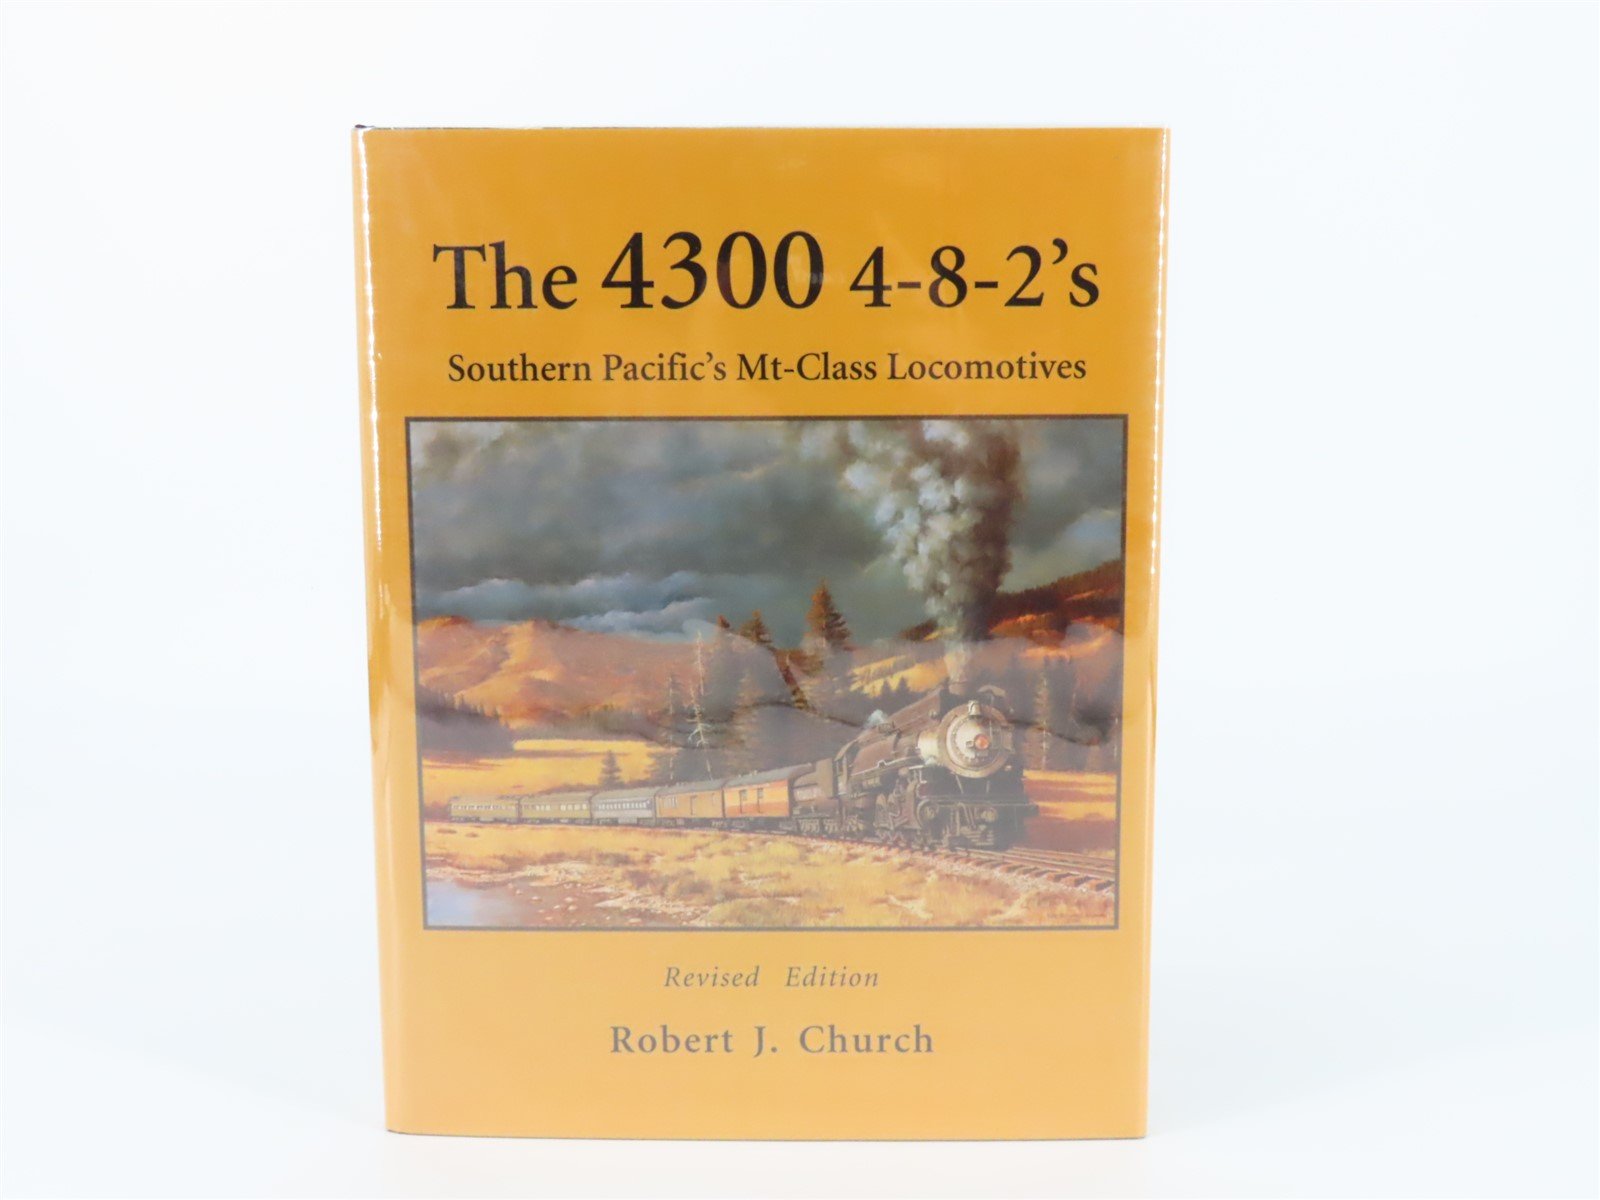 The 4300 4-8-2's Southern Pacific's Mt-Class Locomotives by Church ©1996 HC Book